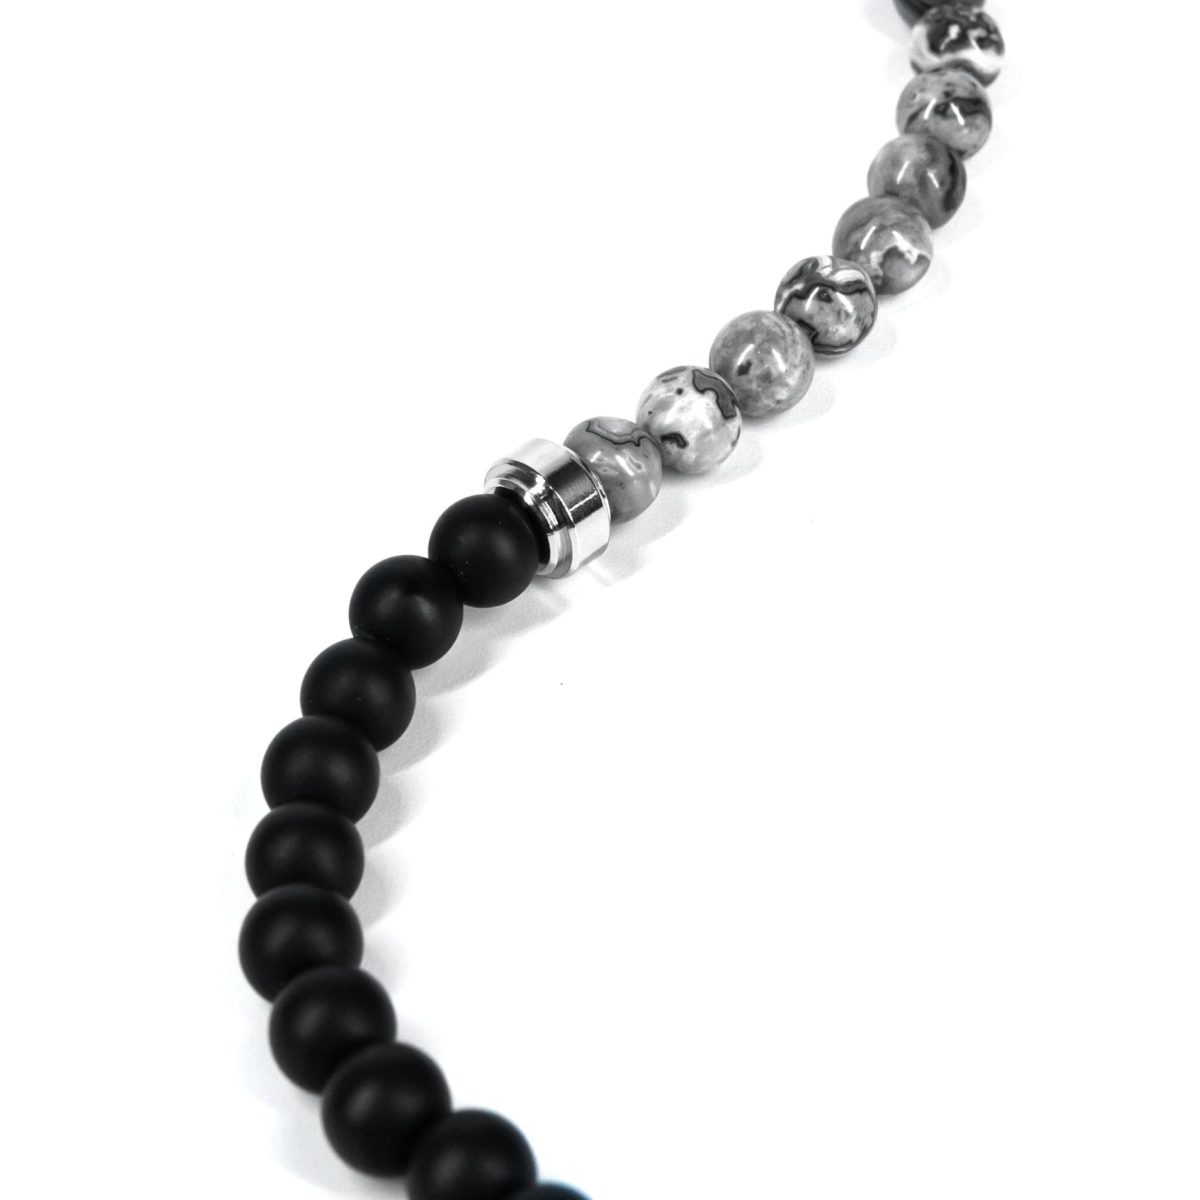 https://m.clubbella.co/product/anson-grey-wave-bracelet/ Anson grey wave bracelet (1)